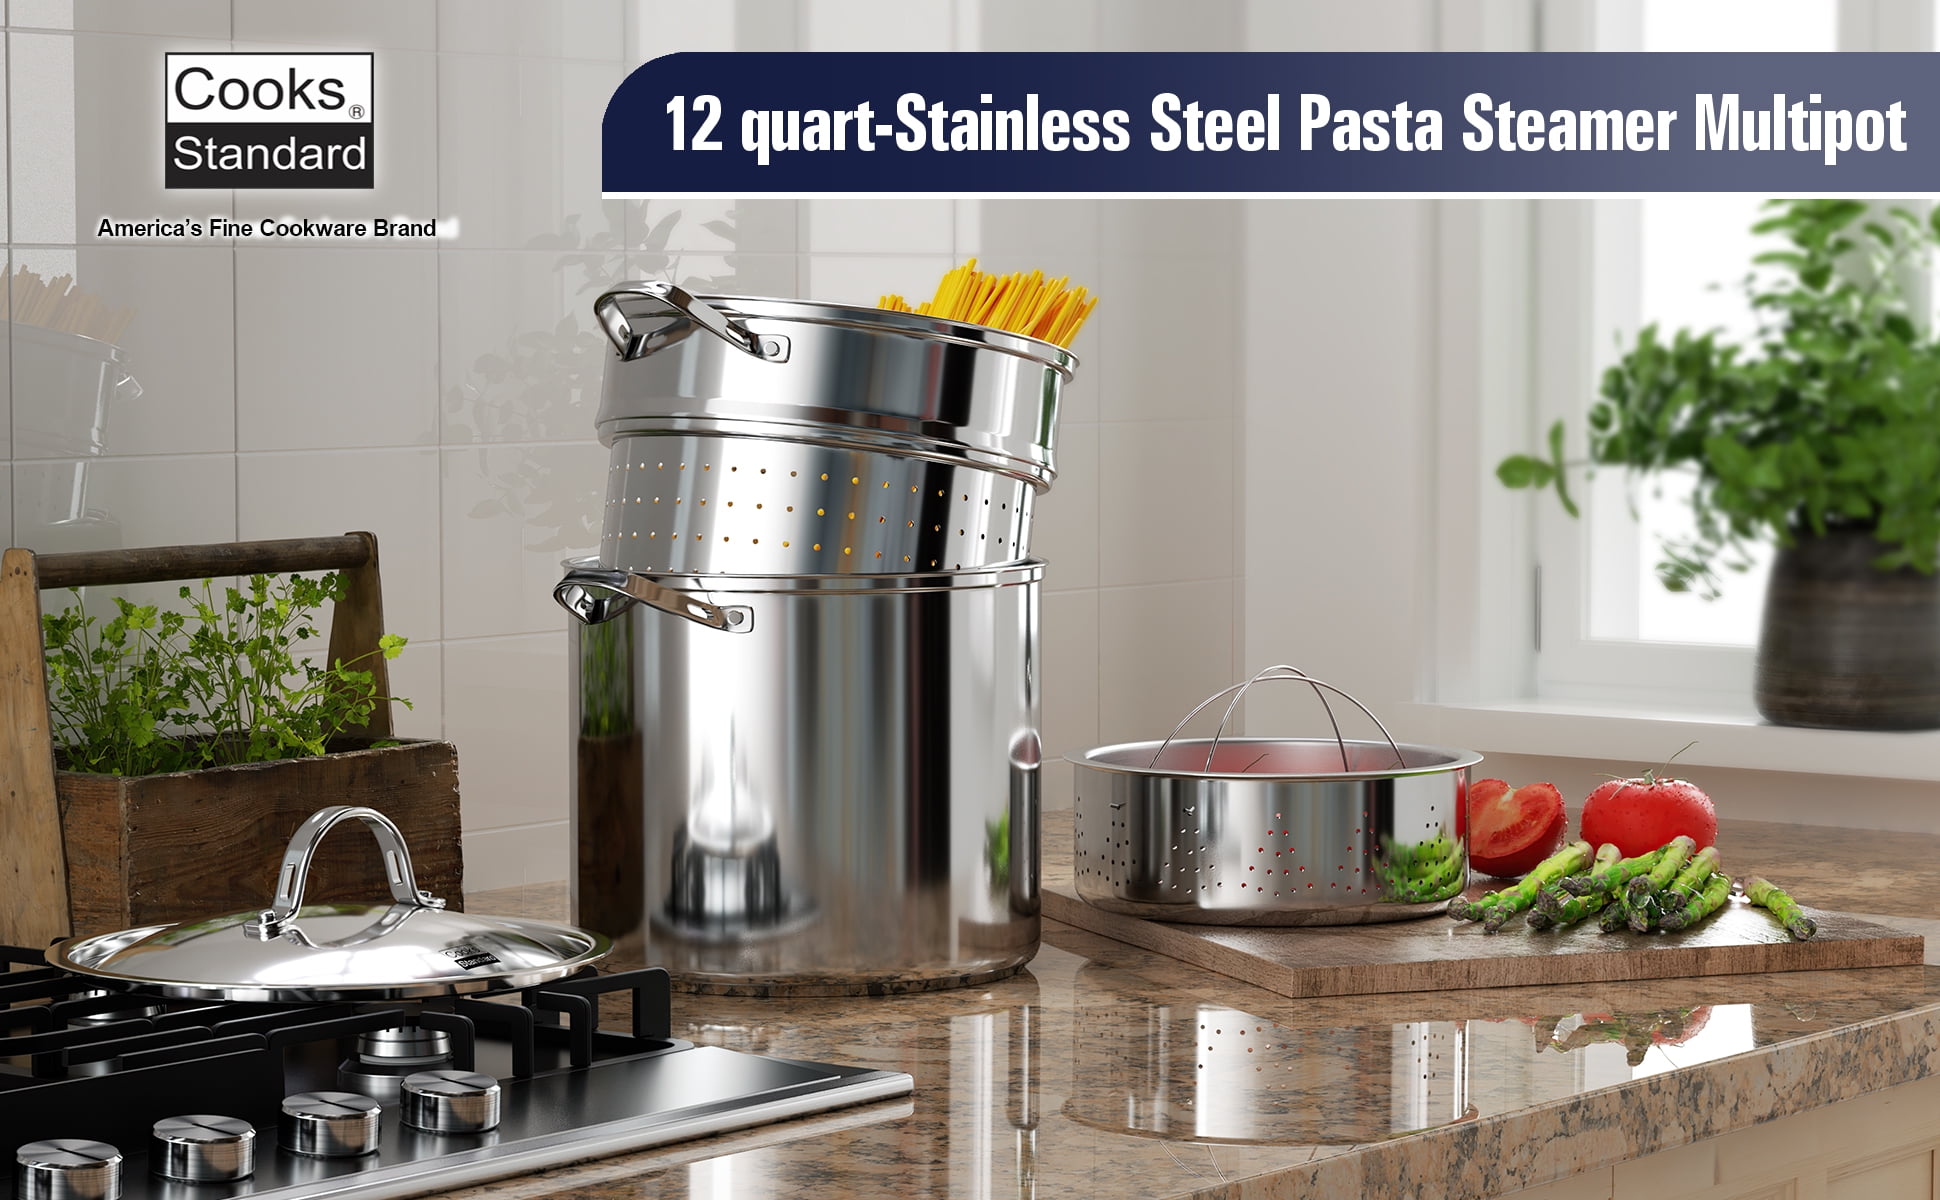 Daniks Classic Stainless Steel Stock Pot with Glass Lid | Induction 3 Quart  | Dishwasher Safe Pot | Measuring Scale | Soup Pasta Stew Pot | Silver